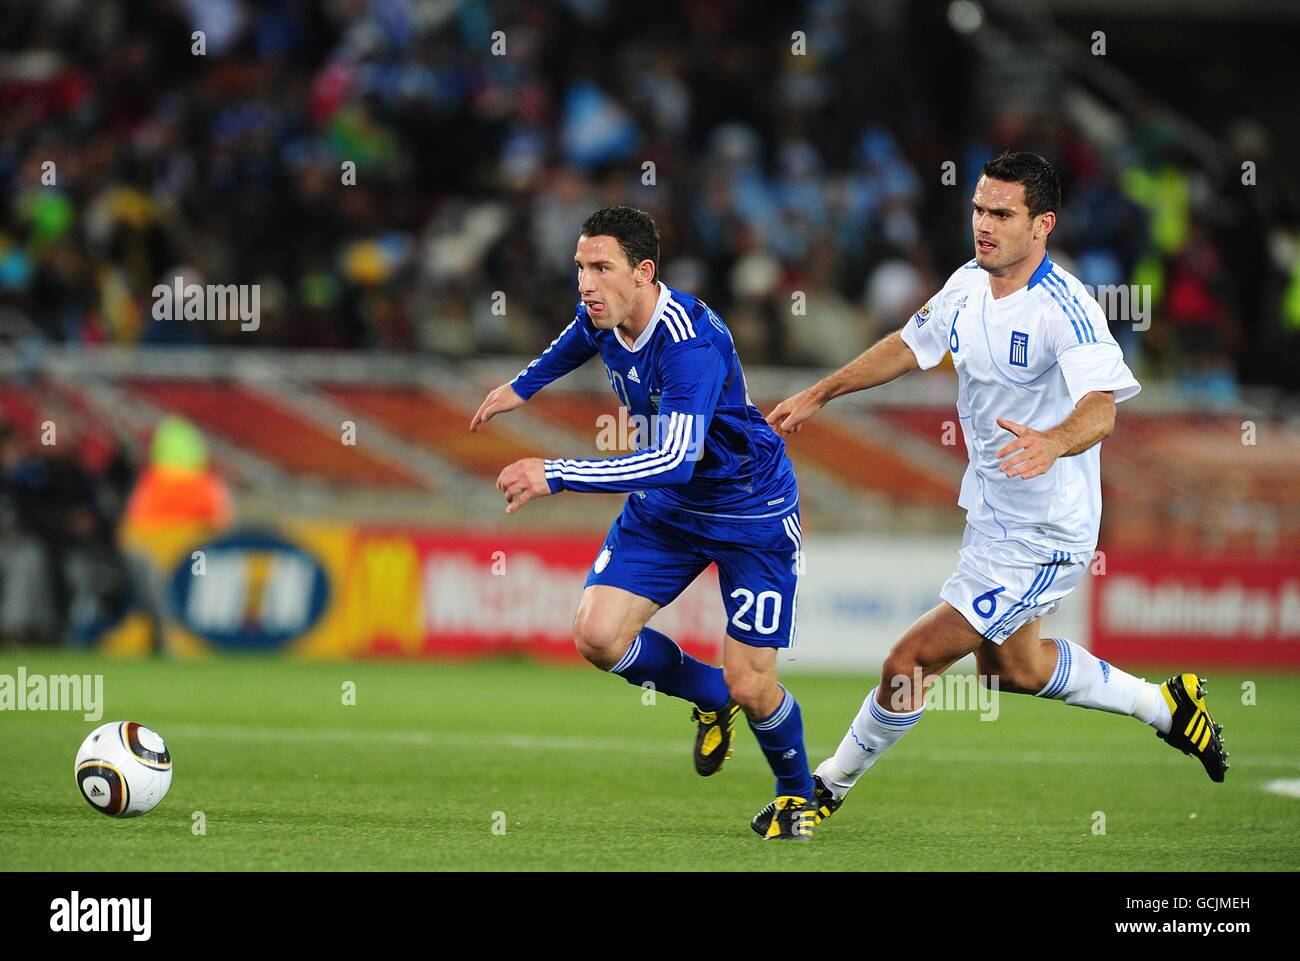 Soccer - 2010 FIFA World Cup South Africa - Group B - Greece v Argentina - Peter Mokaba. Greece's Alexandros Tzorvas (right) and Argentina's Rodriguez Maxi (left) battle for the ball. Stock Photo